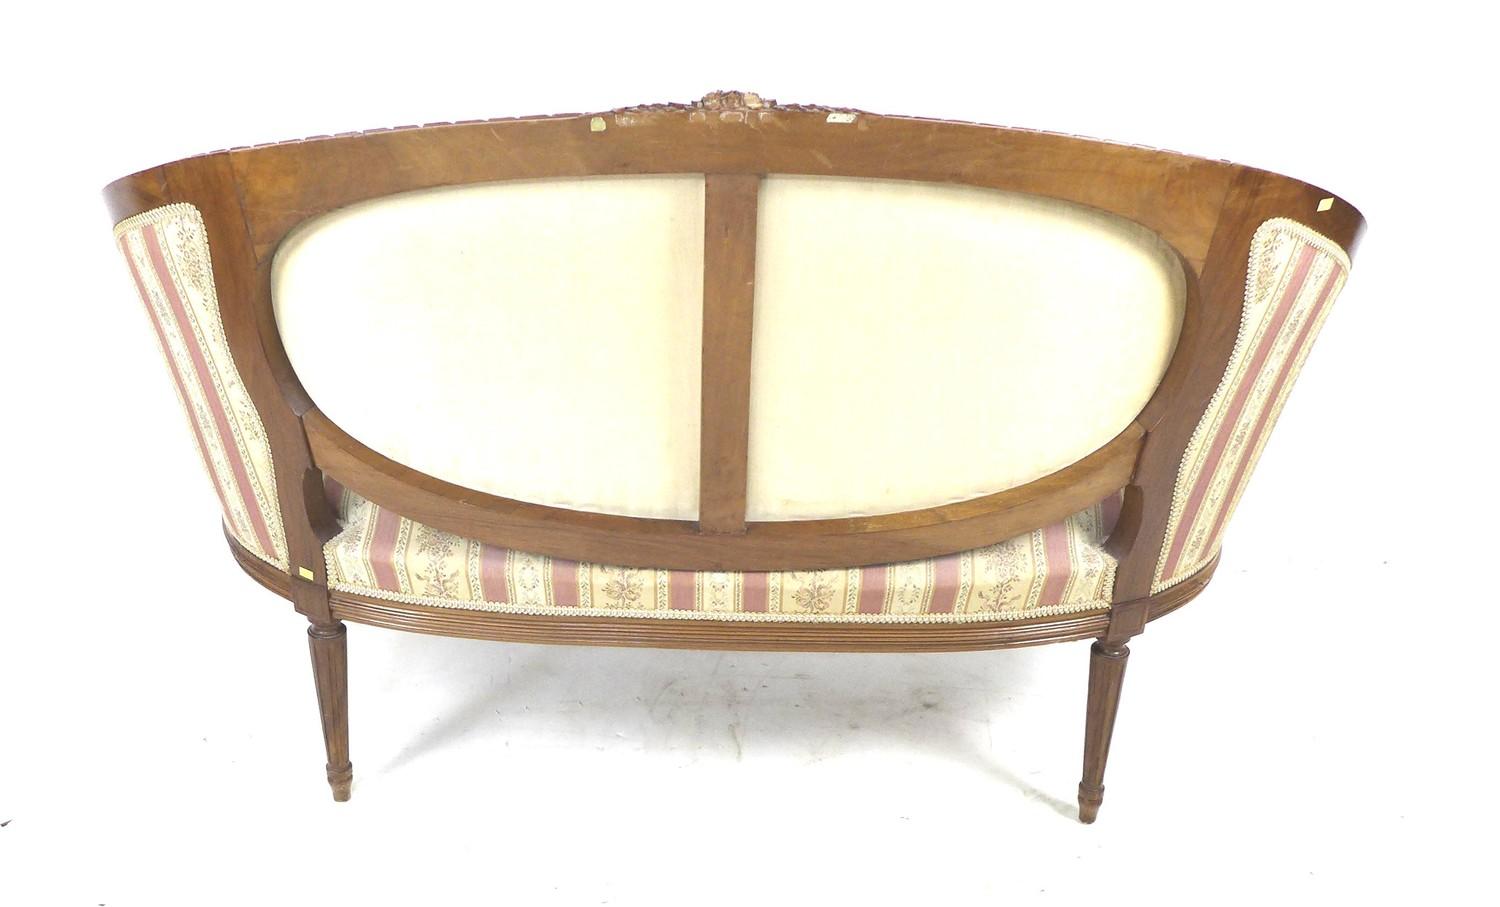 A French two seater settee, mid 20th century in Louis XVI style, with curved back with integral - Image 4 of 4